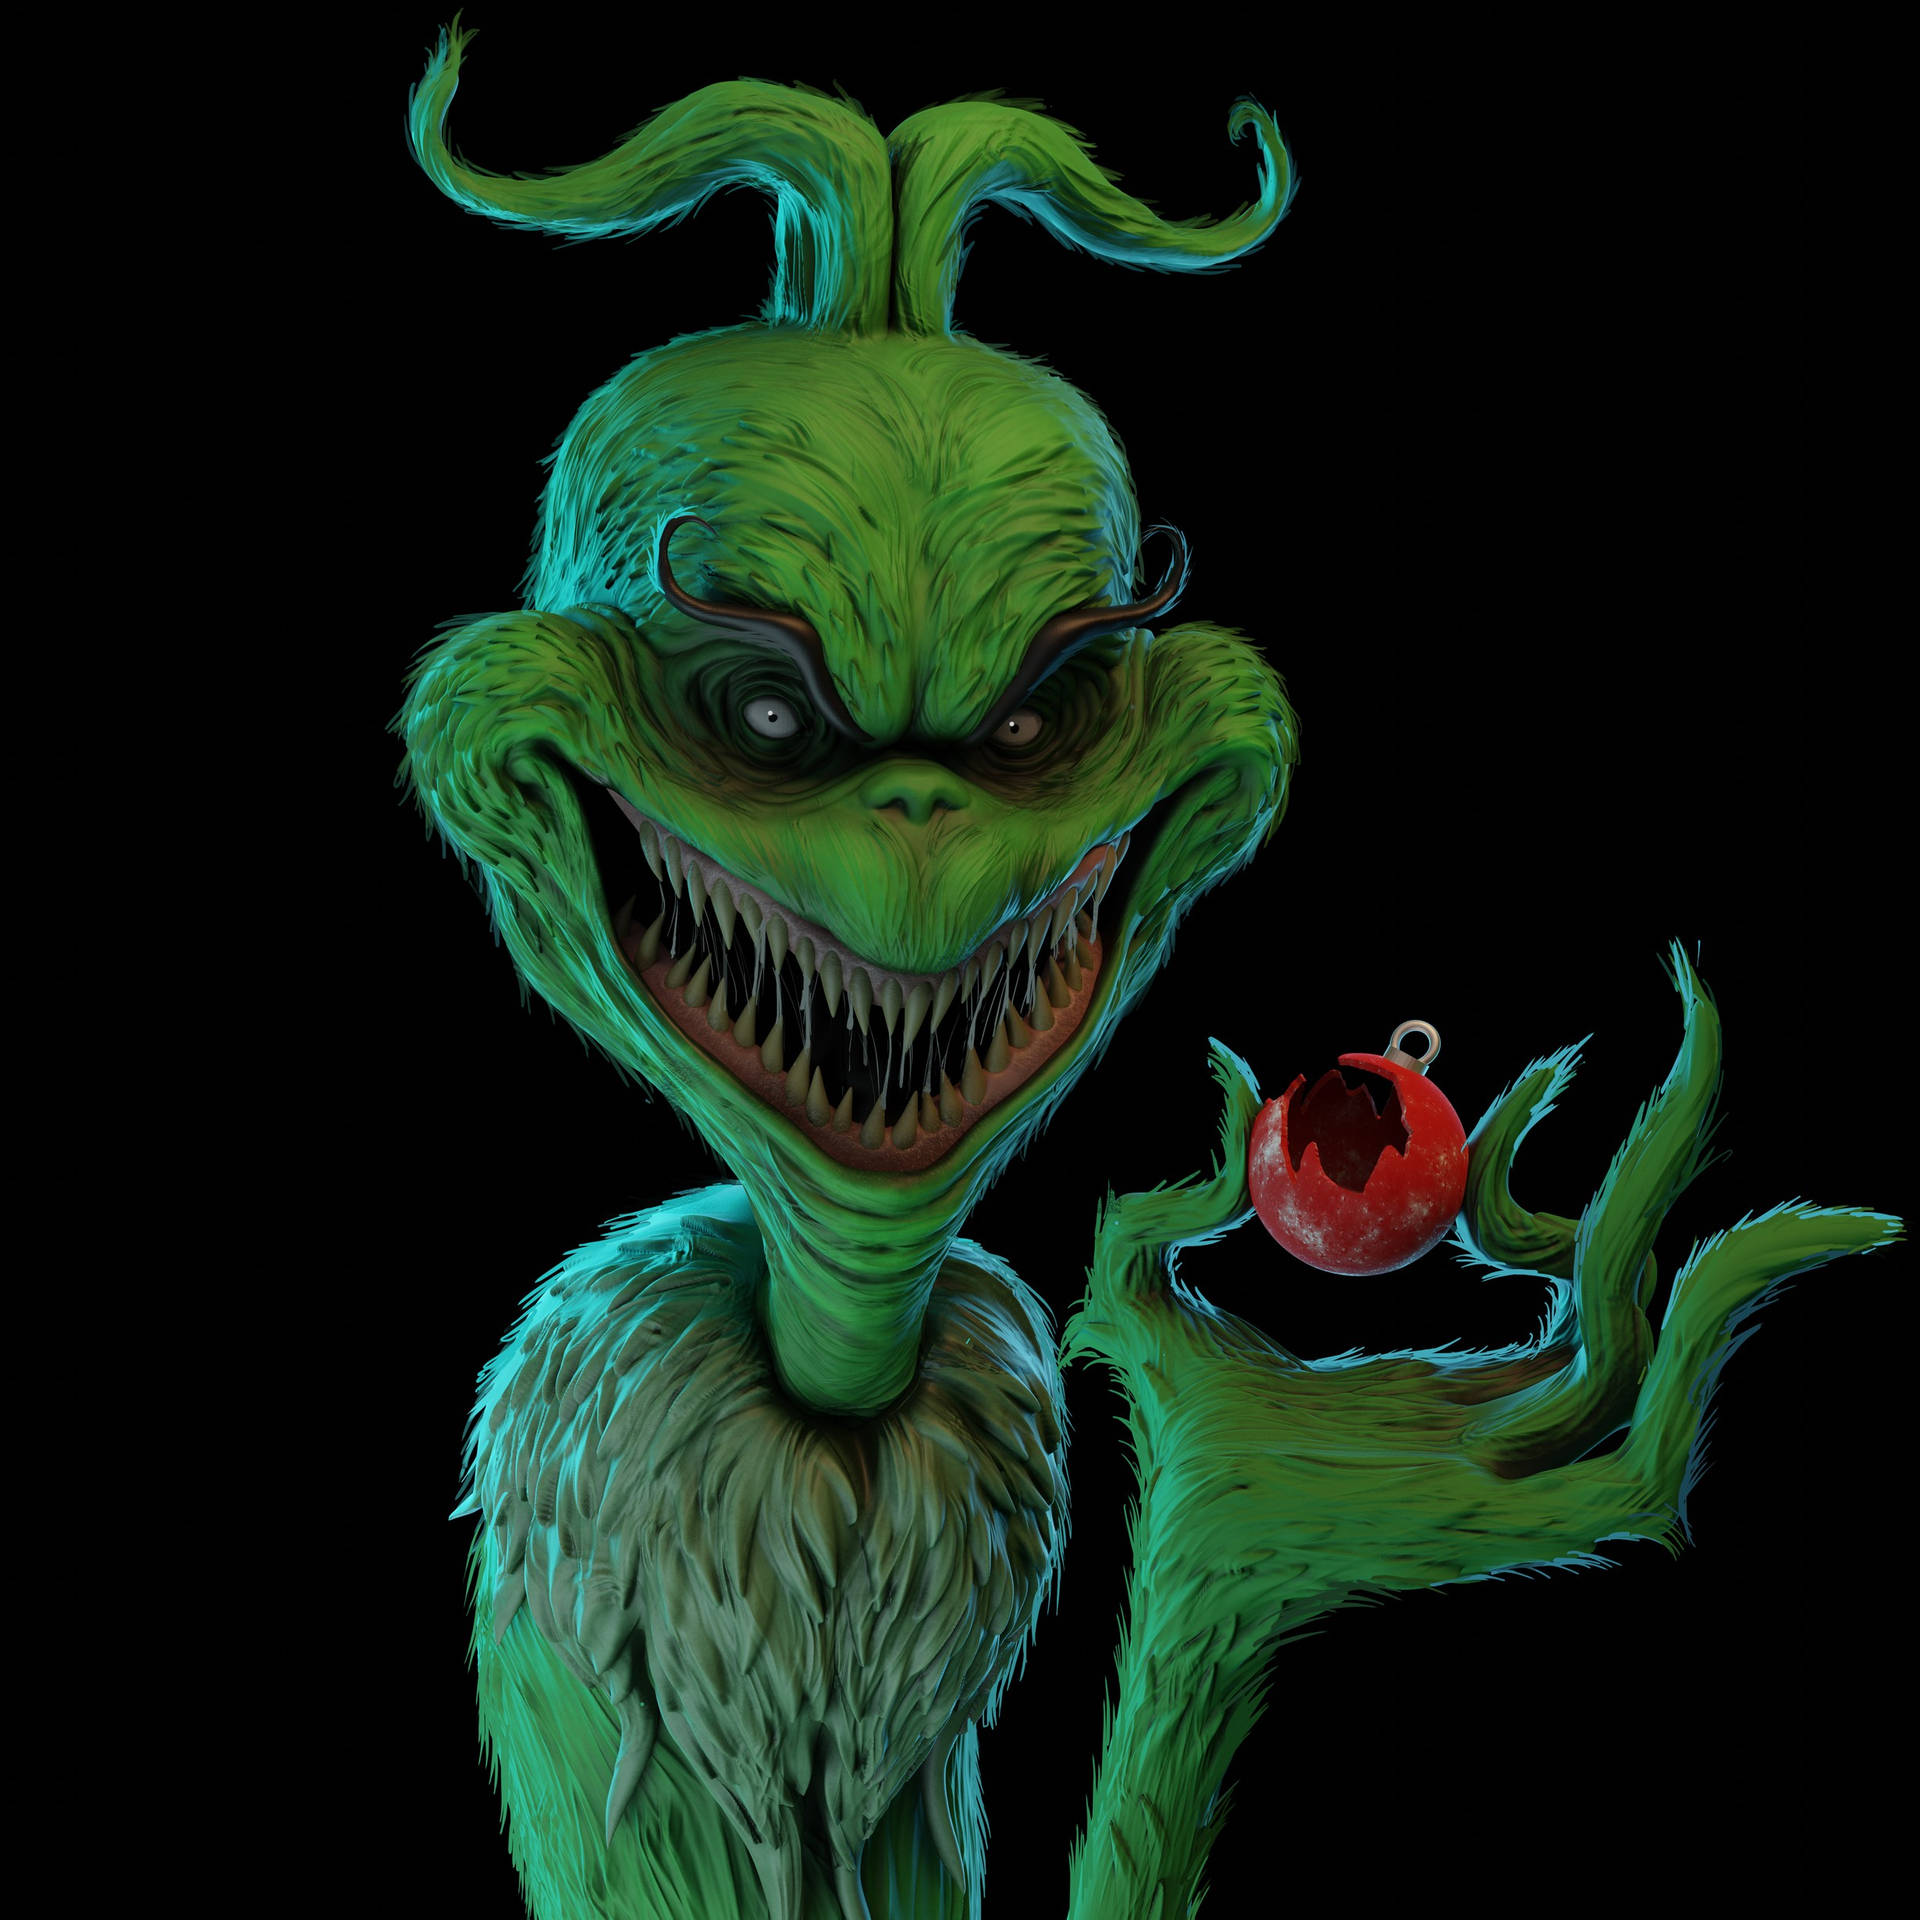 The Grinch Evil Background